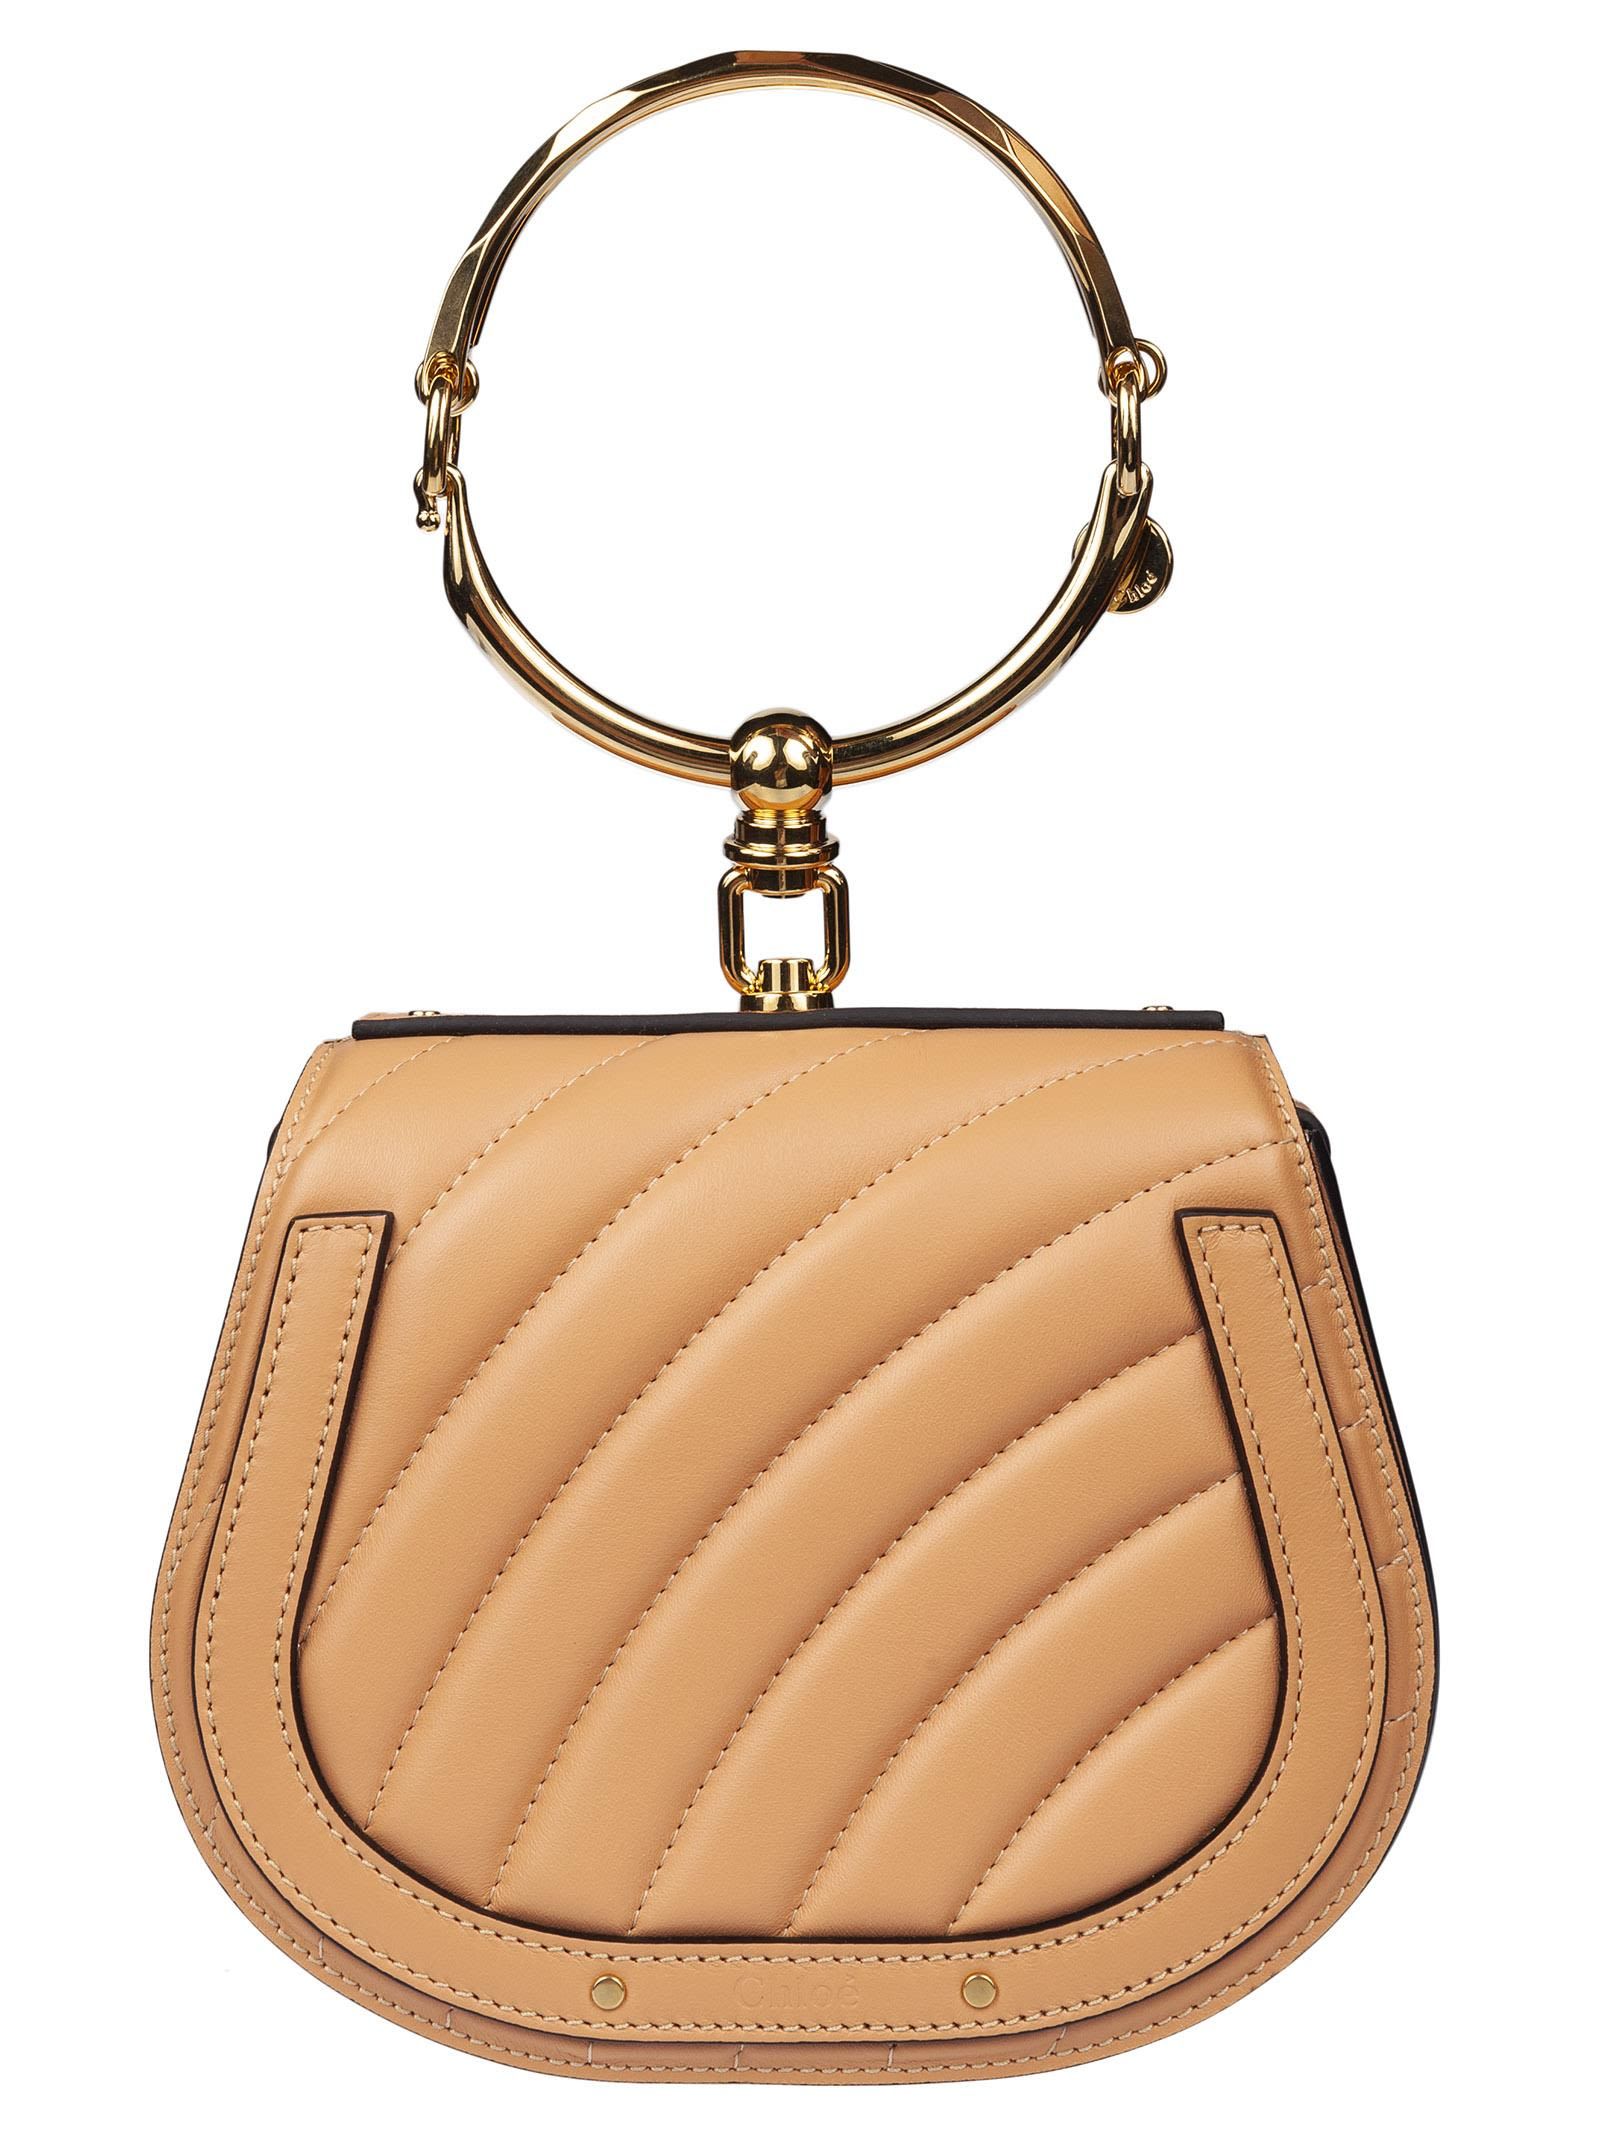 Chloe Small Nile Quilted Shoulder Bag | Italist.com US